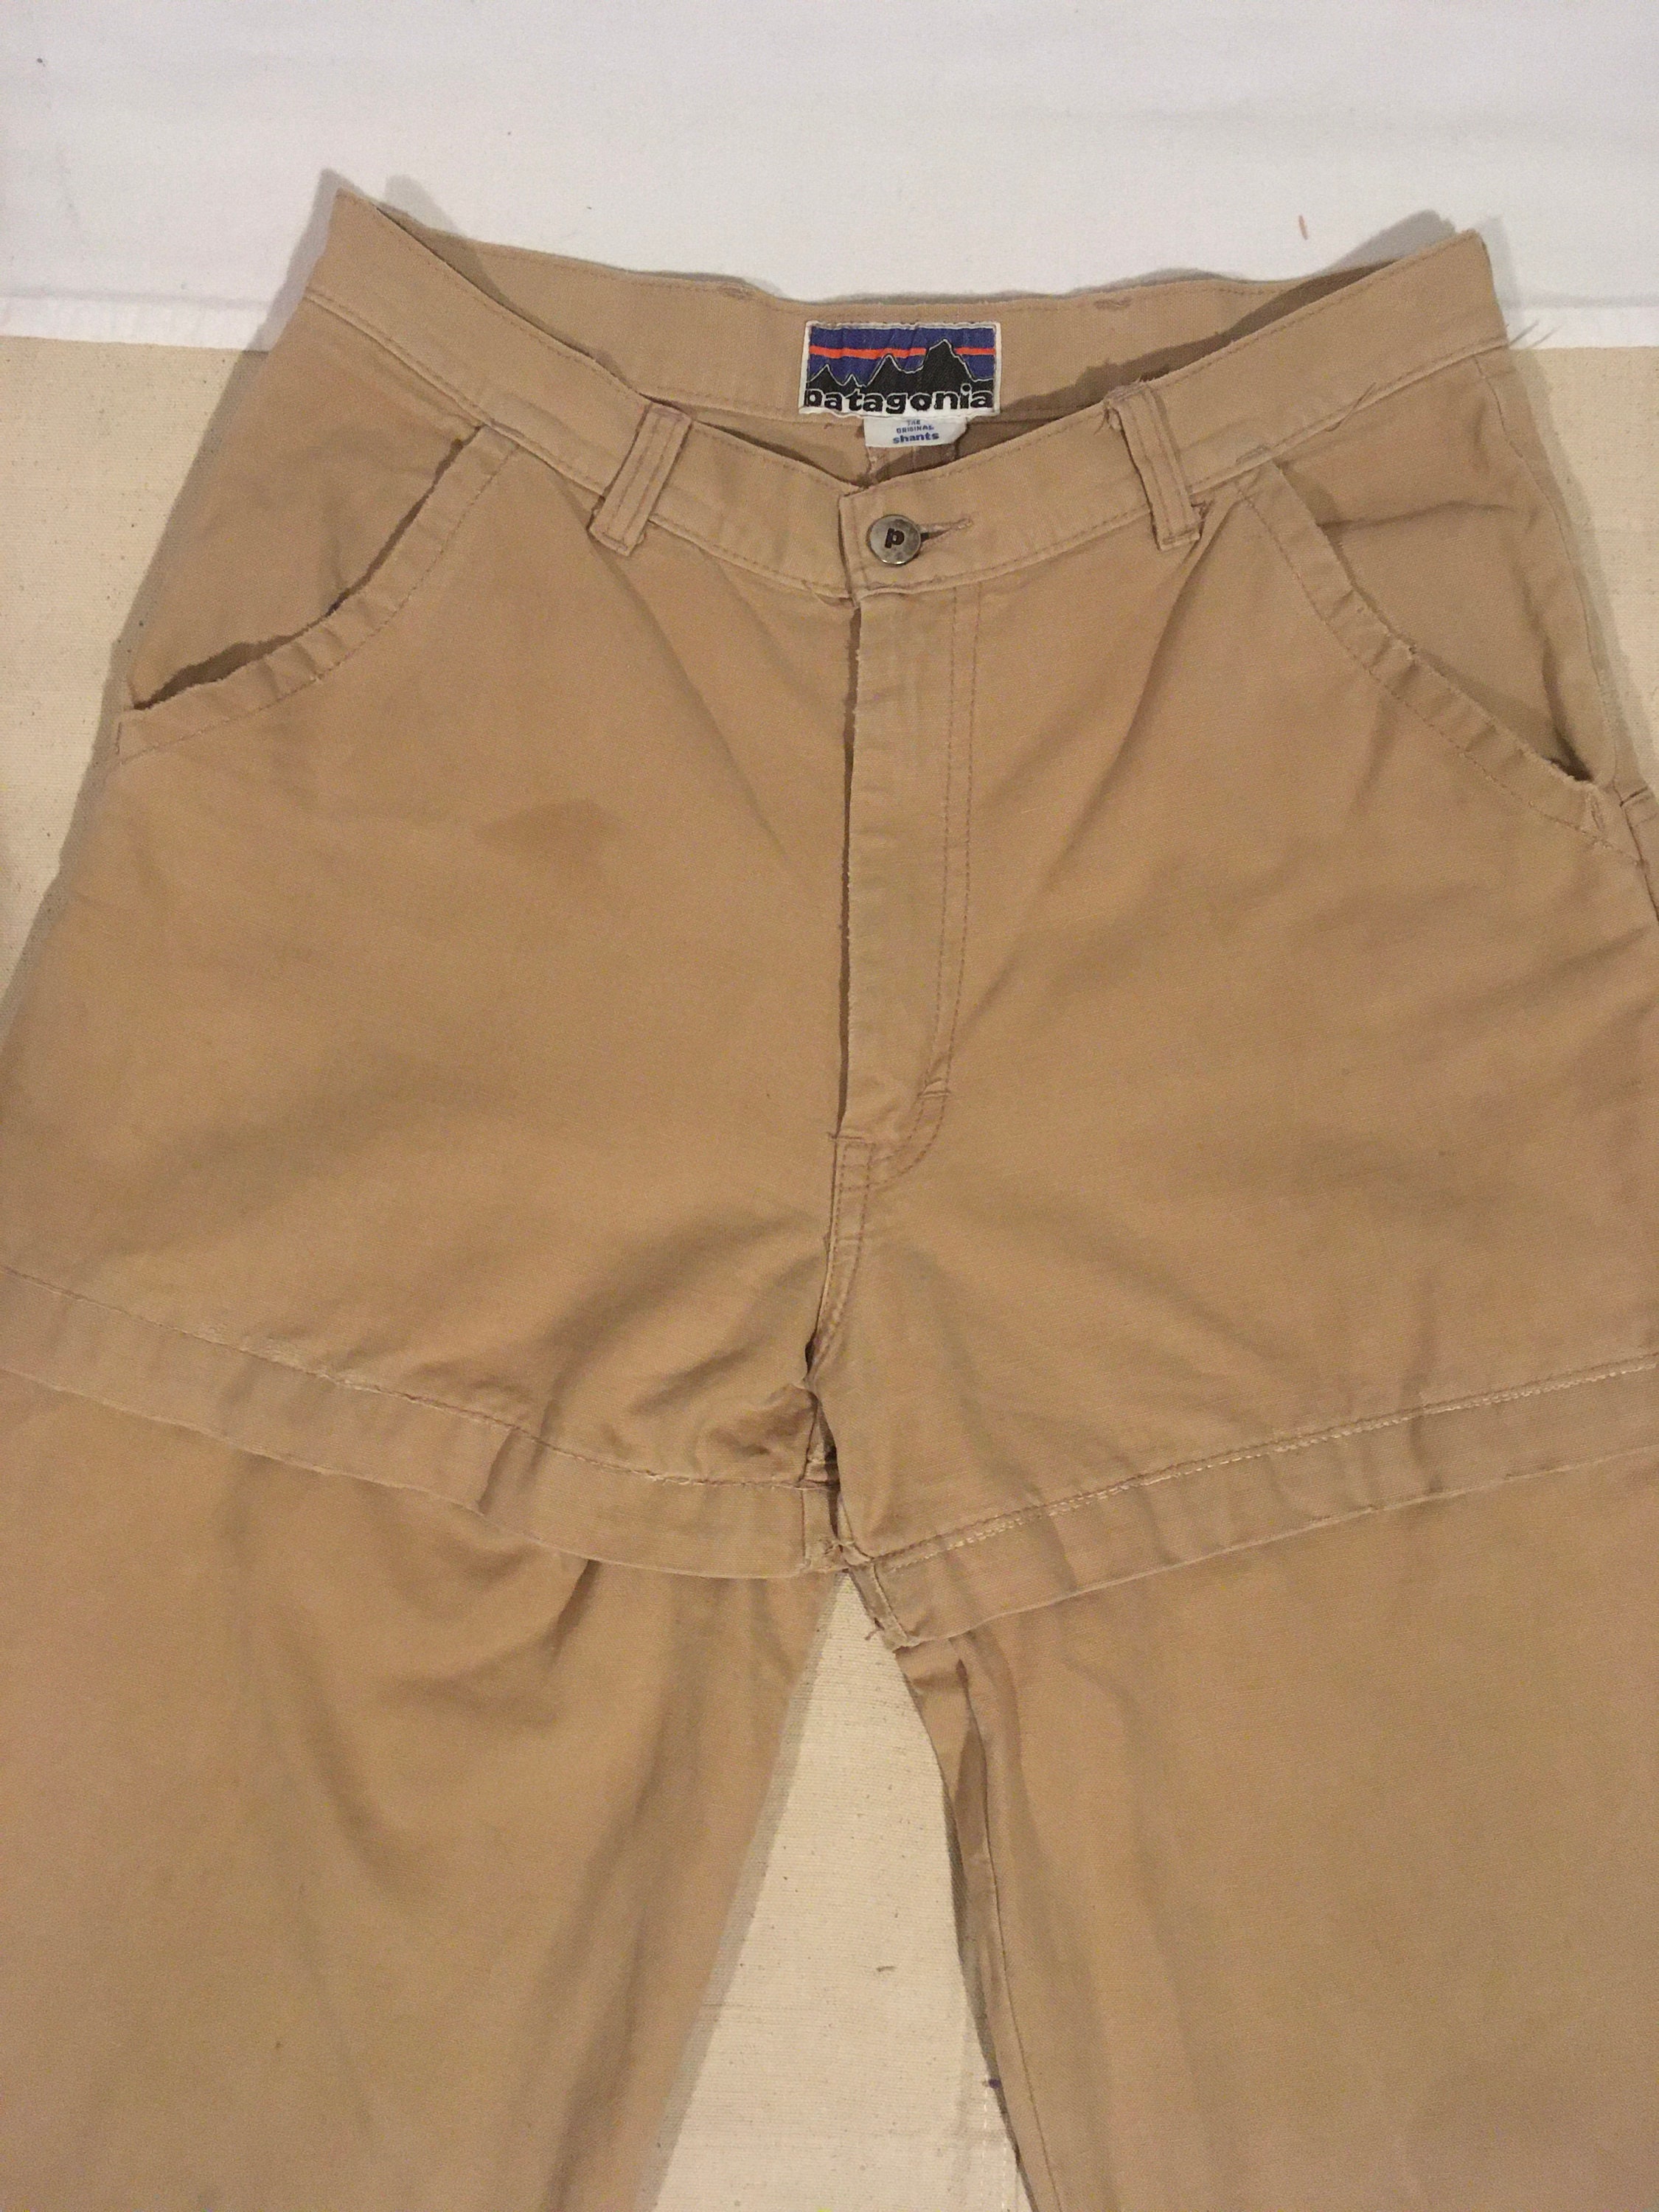 Vintage 70s Patagonia First Label the Original Shants Convertible Pants  Kakhi Cotton Trousers to Shorts Outdoor Wear 31 X 30 -  Canada